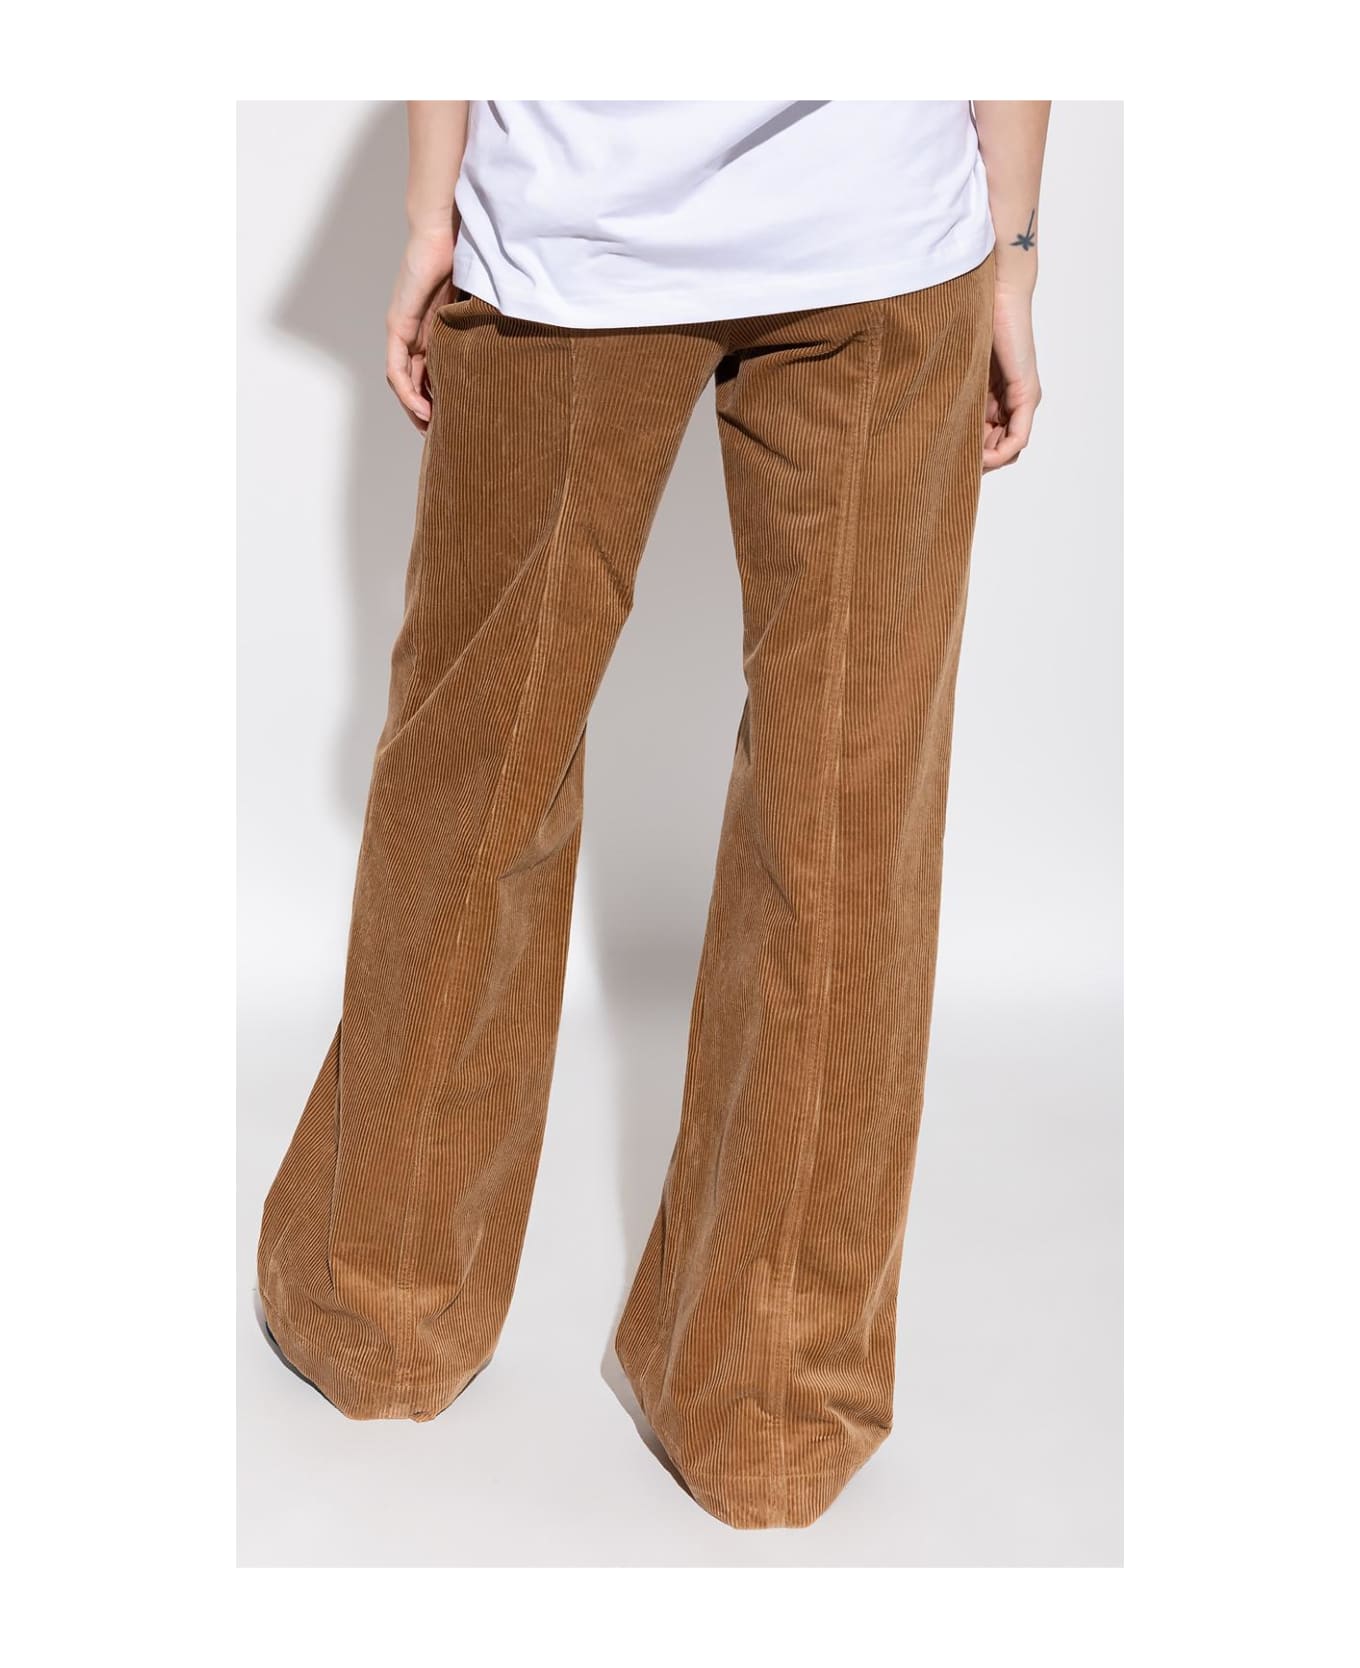 Burberry 'blakely' Corduroy Trousers - BROWN ボトムス